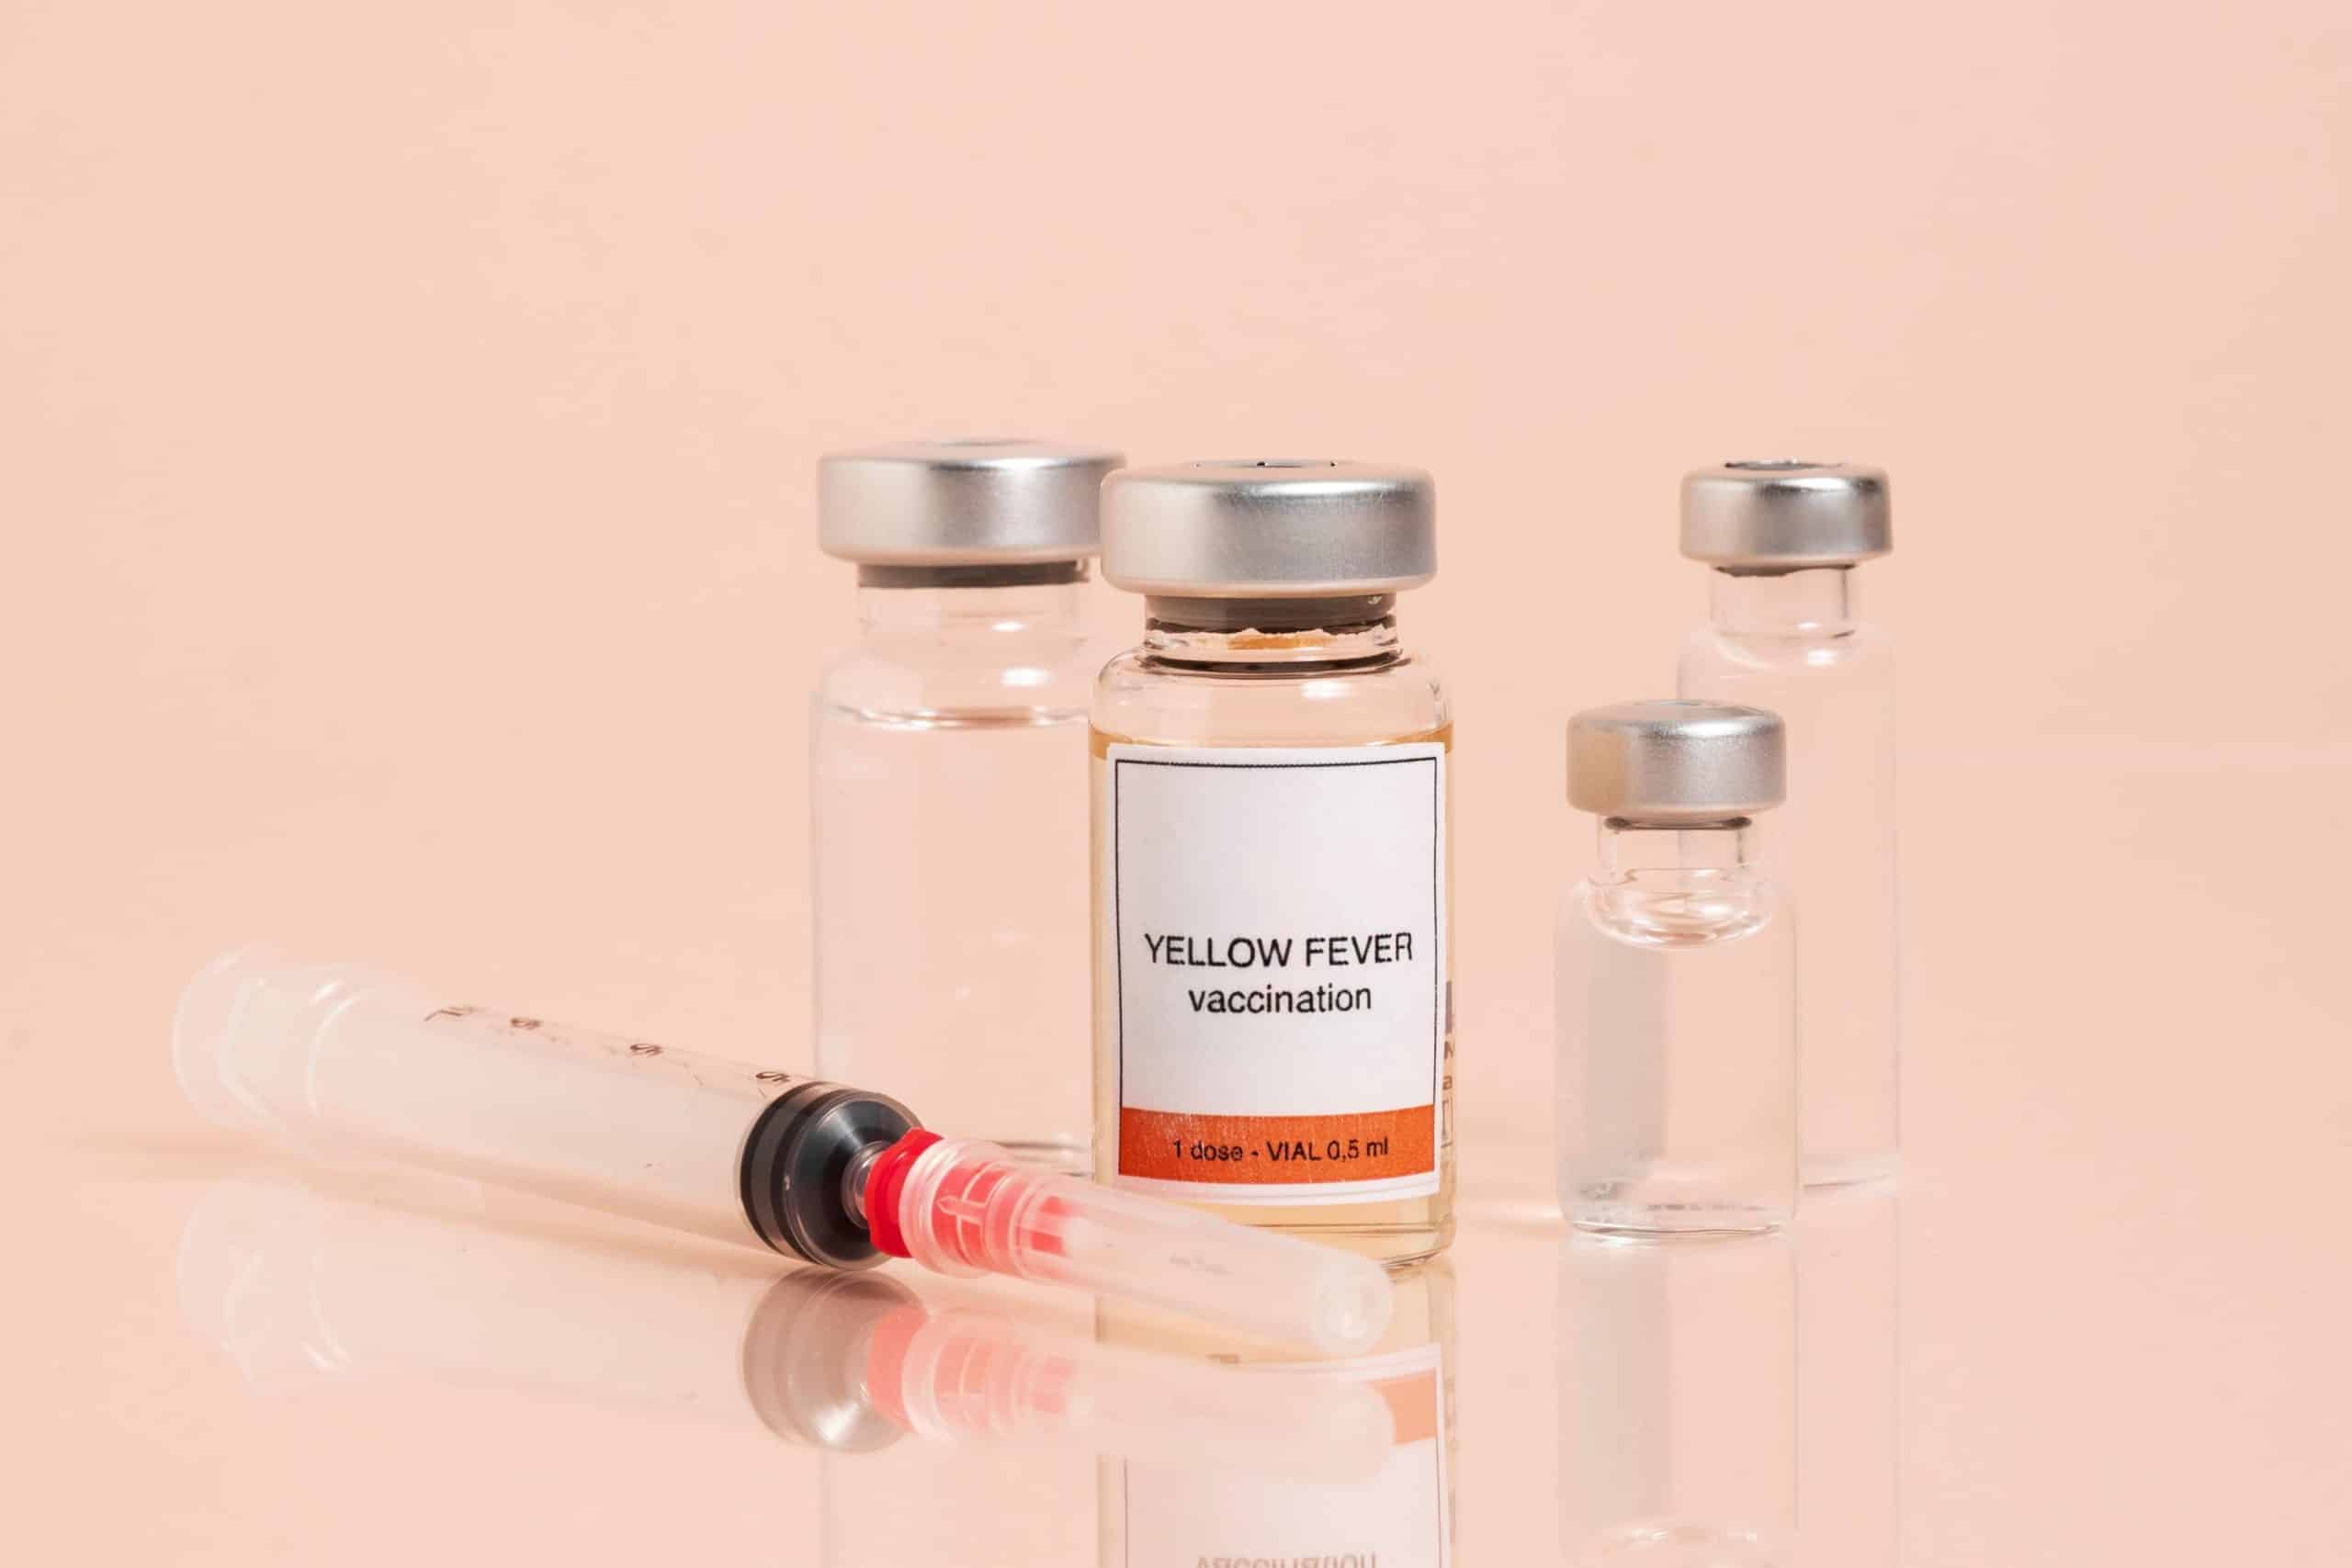 What are the health benefits of yellow fever vaccine